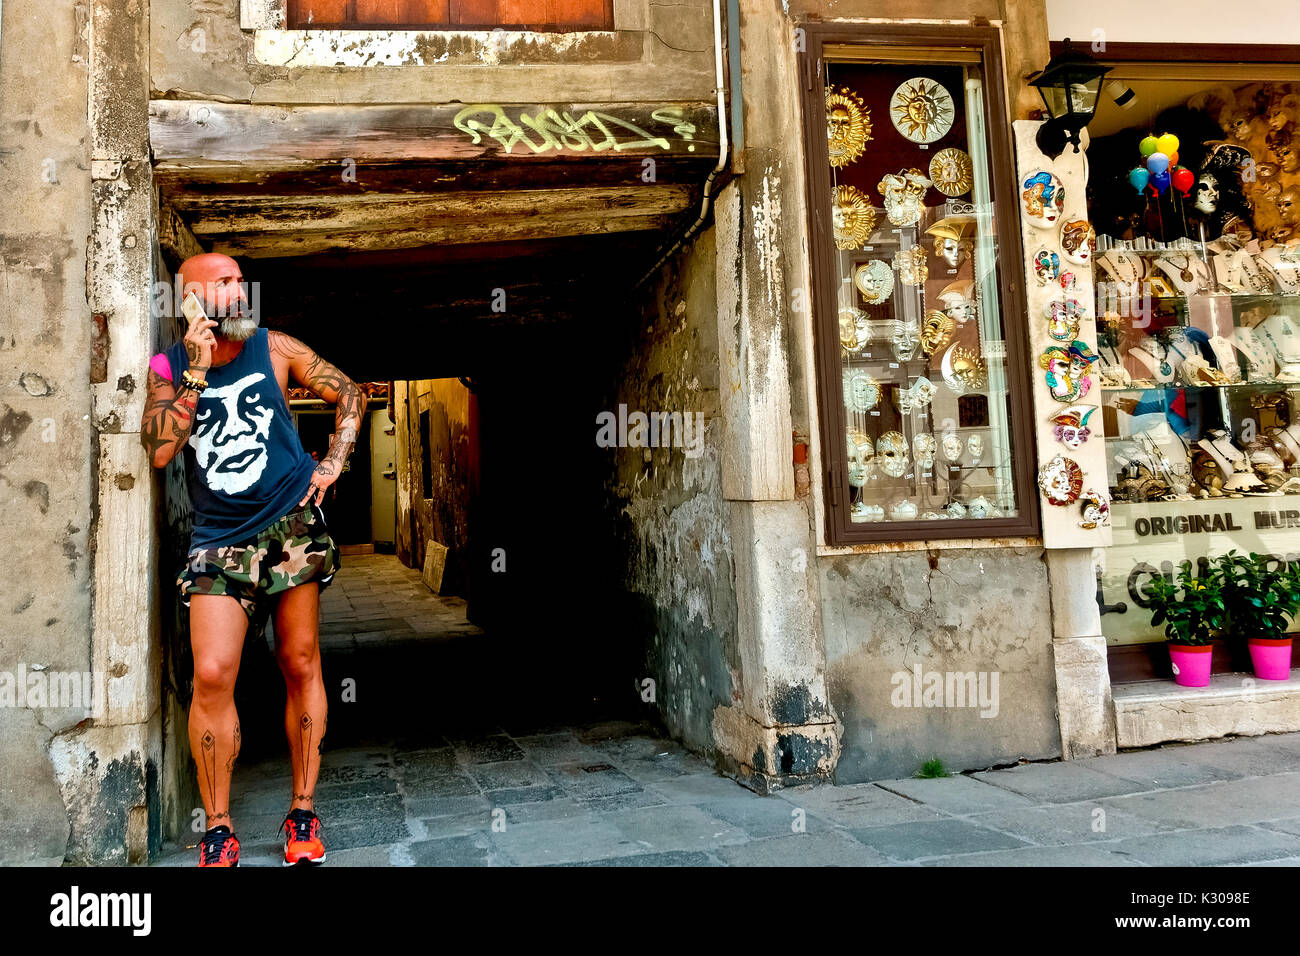 Tatooed, bearded, bald headed man wearing tank top and military short pants, leaning against wall, talking on mobile phone. Venice, Italy, Europe, EU. Stock Photo